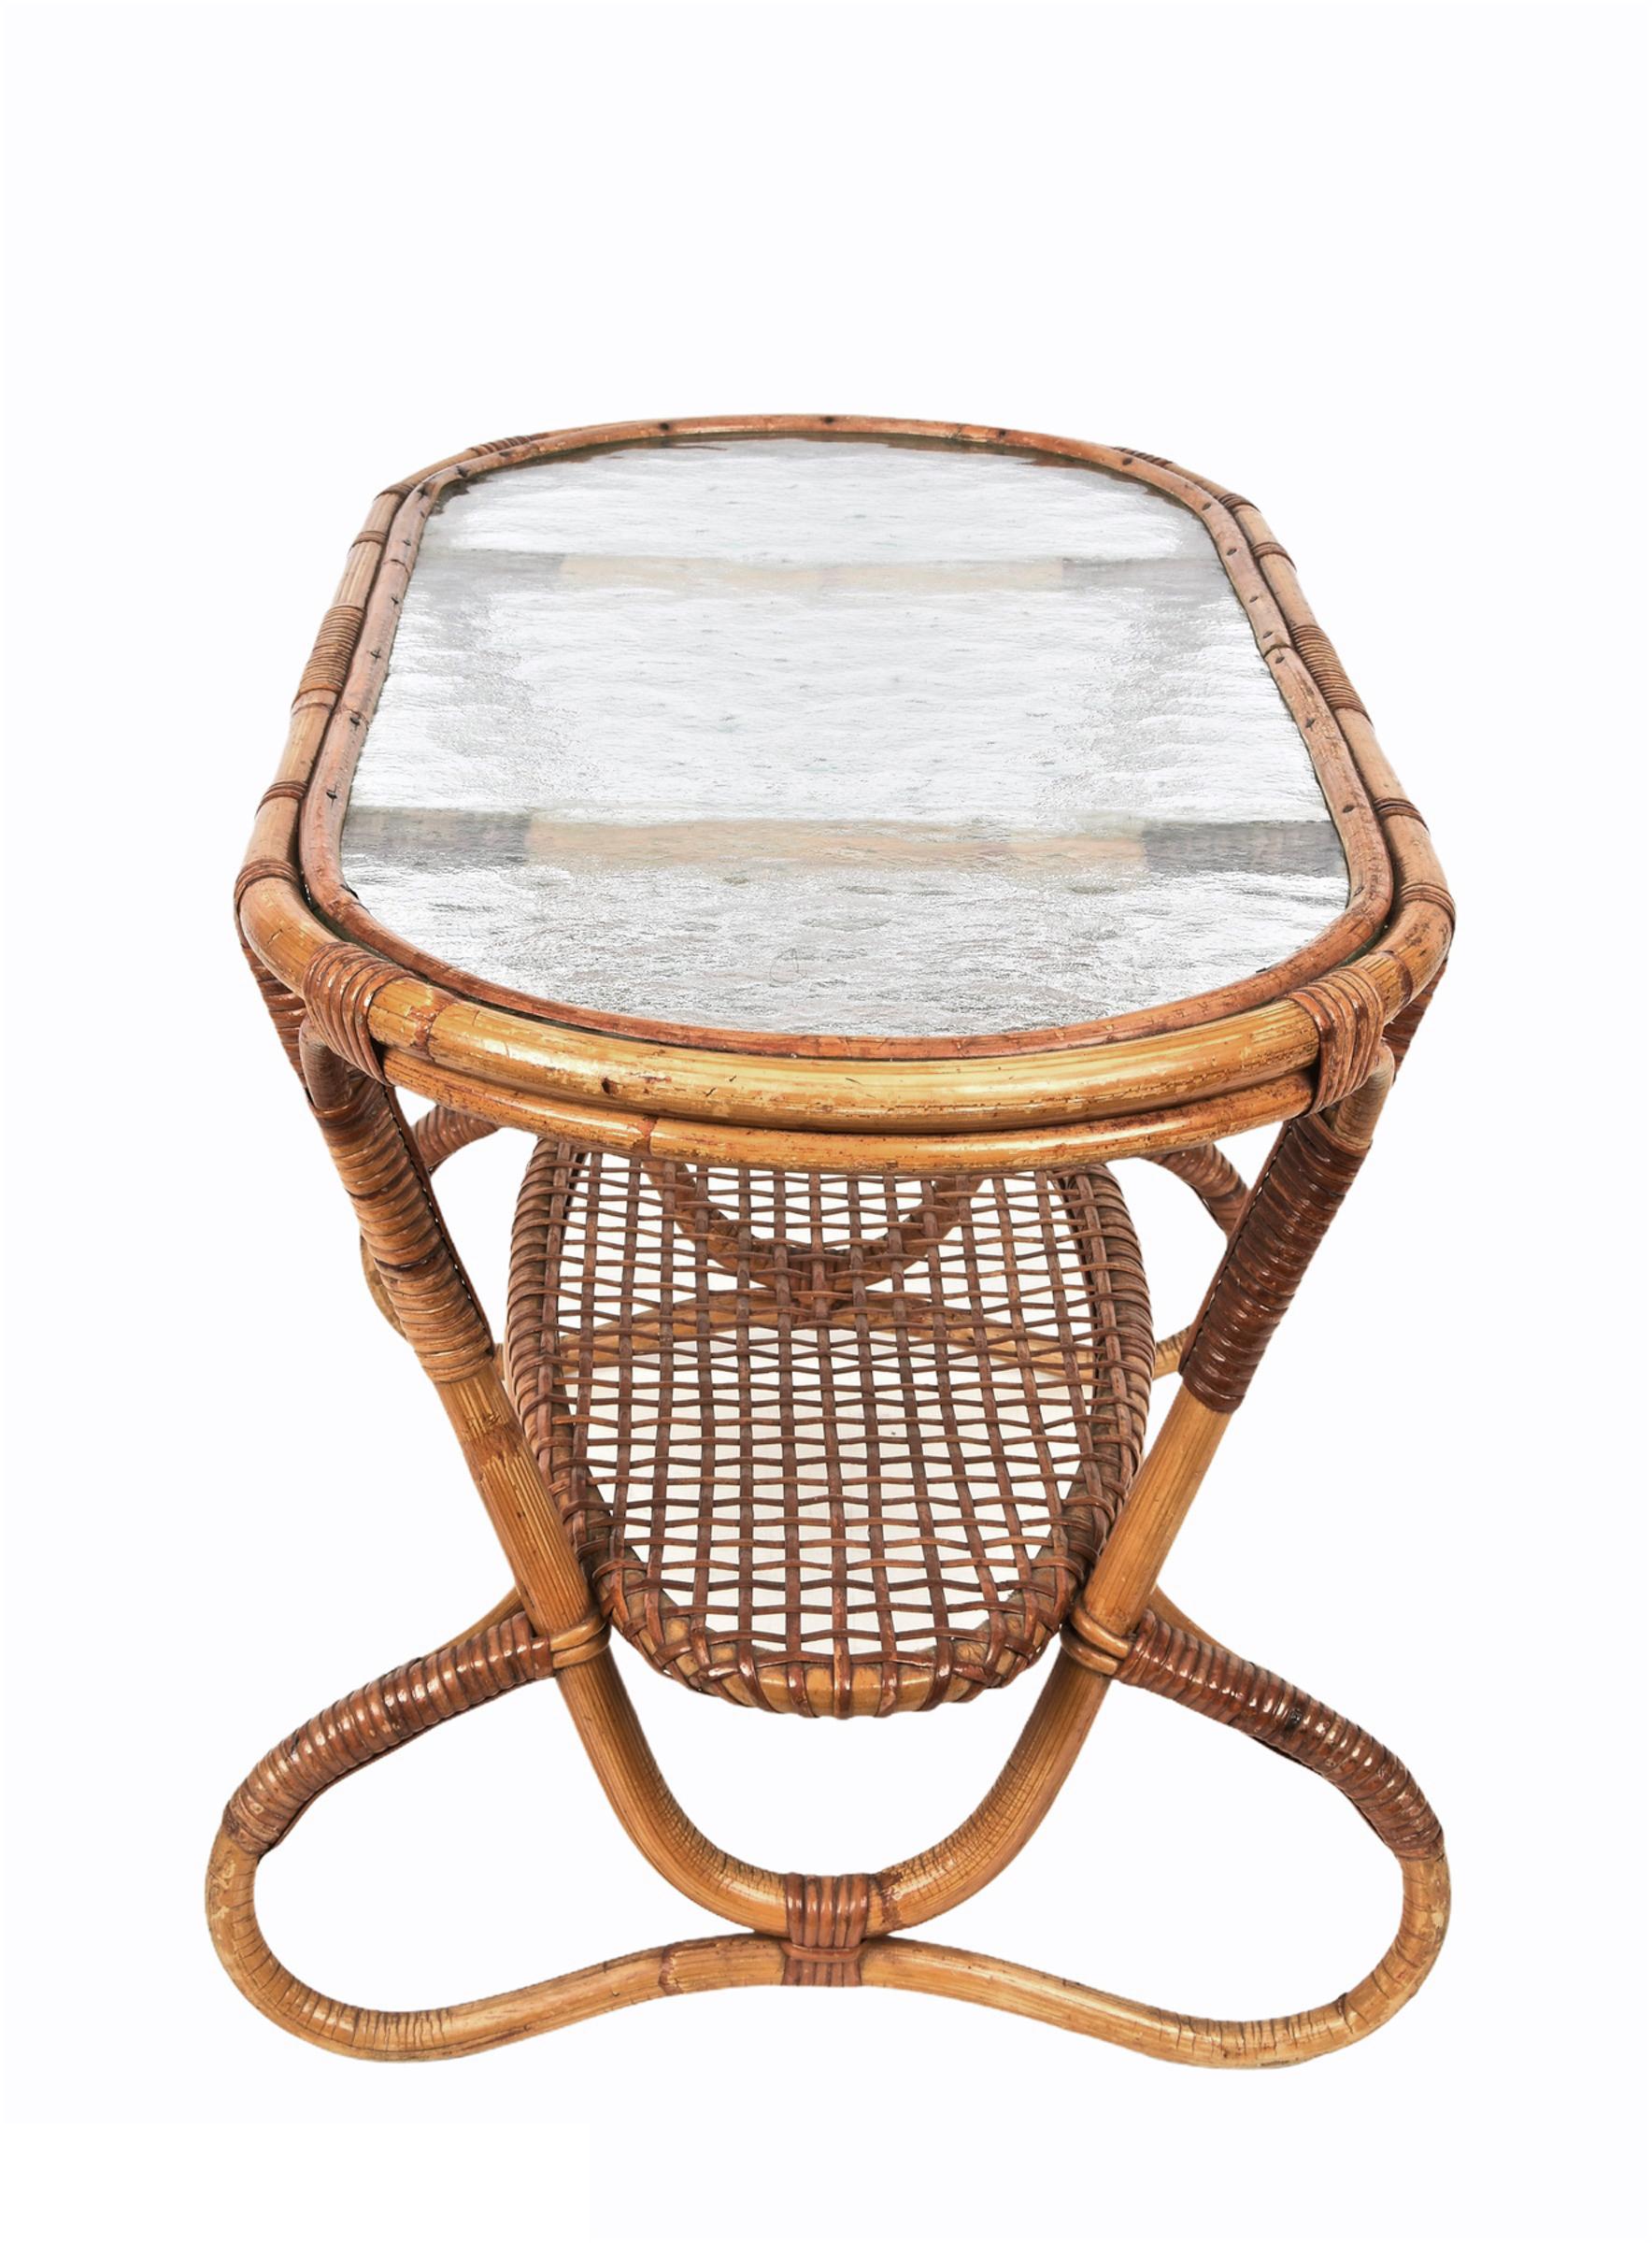 Midcentury Oval Rattan and Bamboo Dutch Coffee Table with Glass Top, 1950s For Sale 12